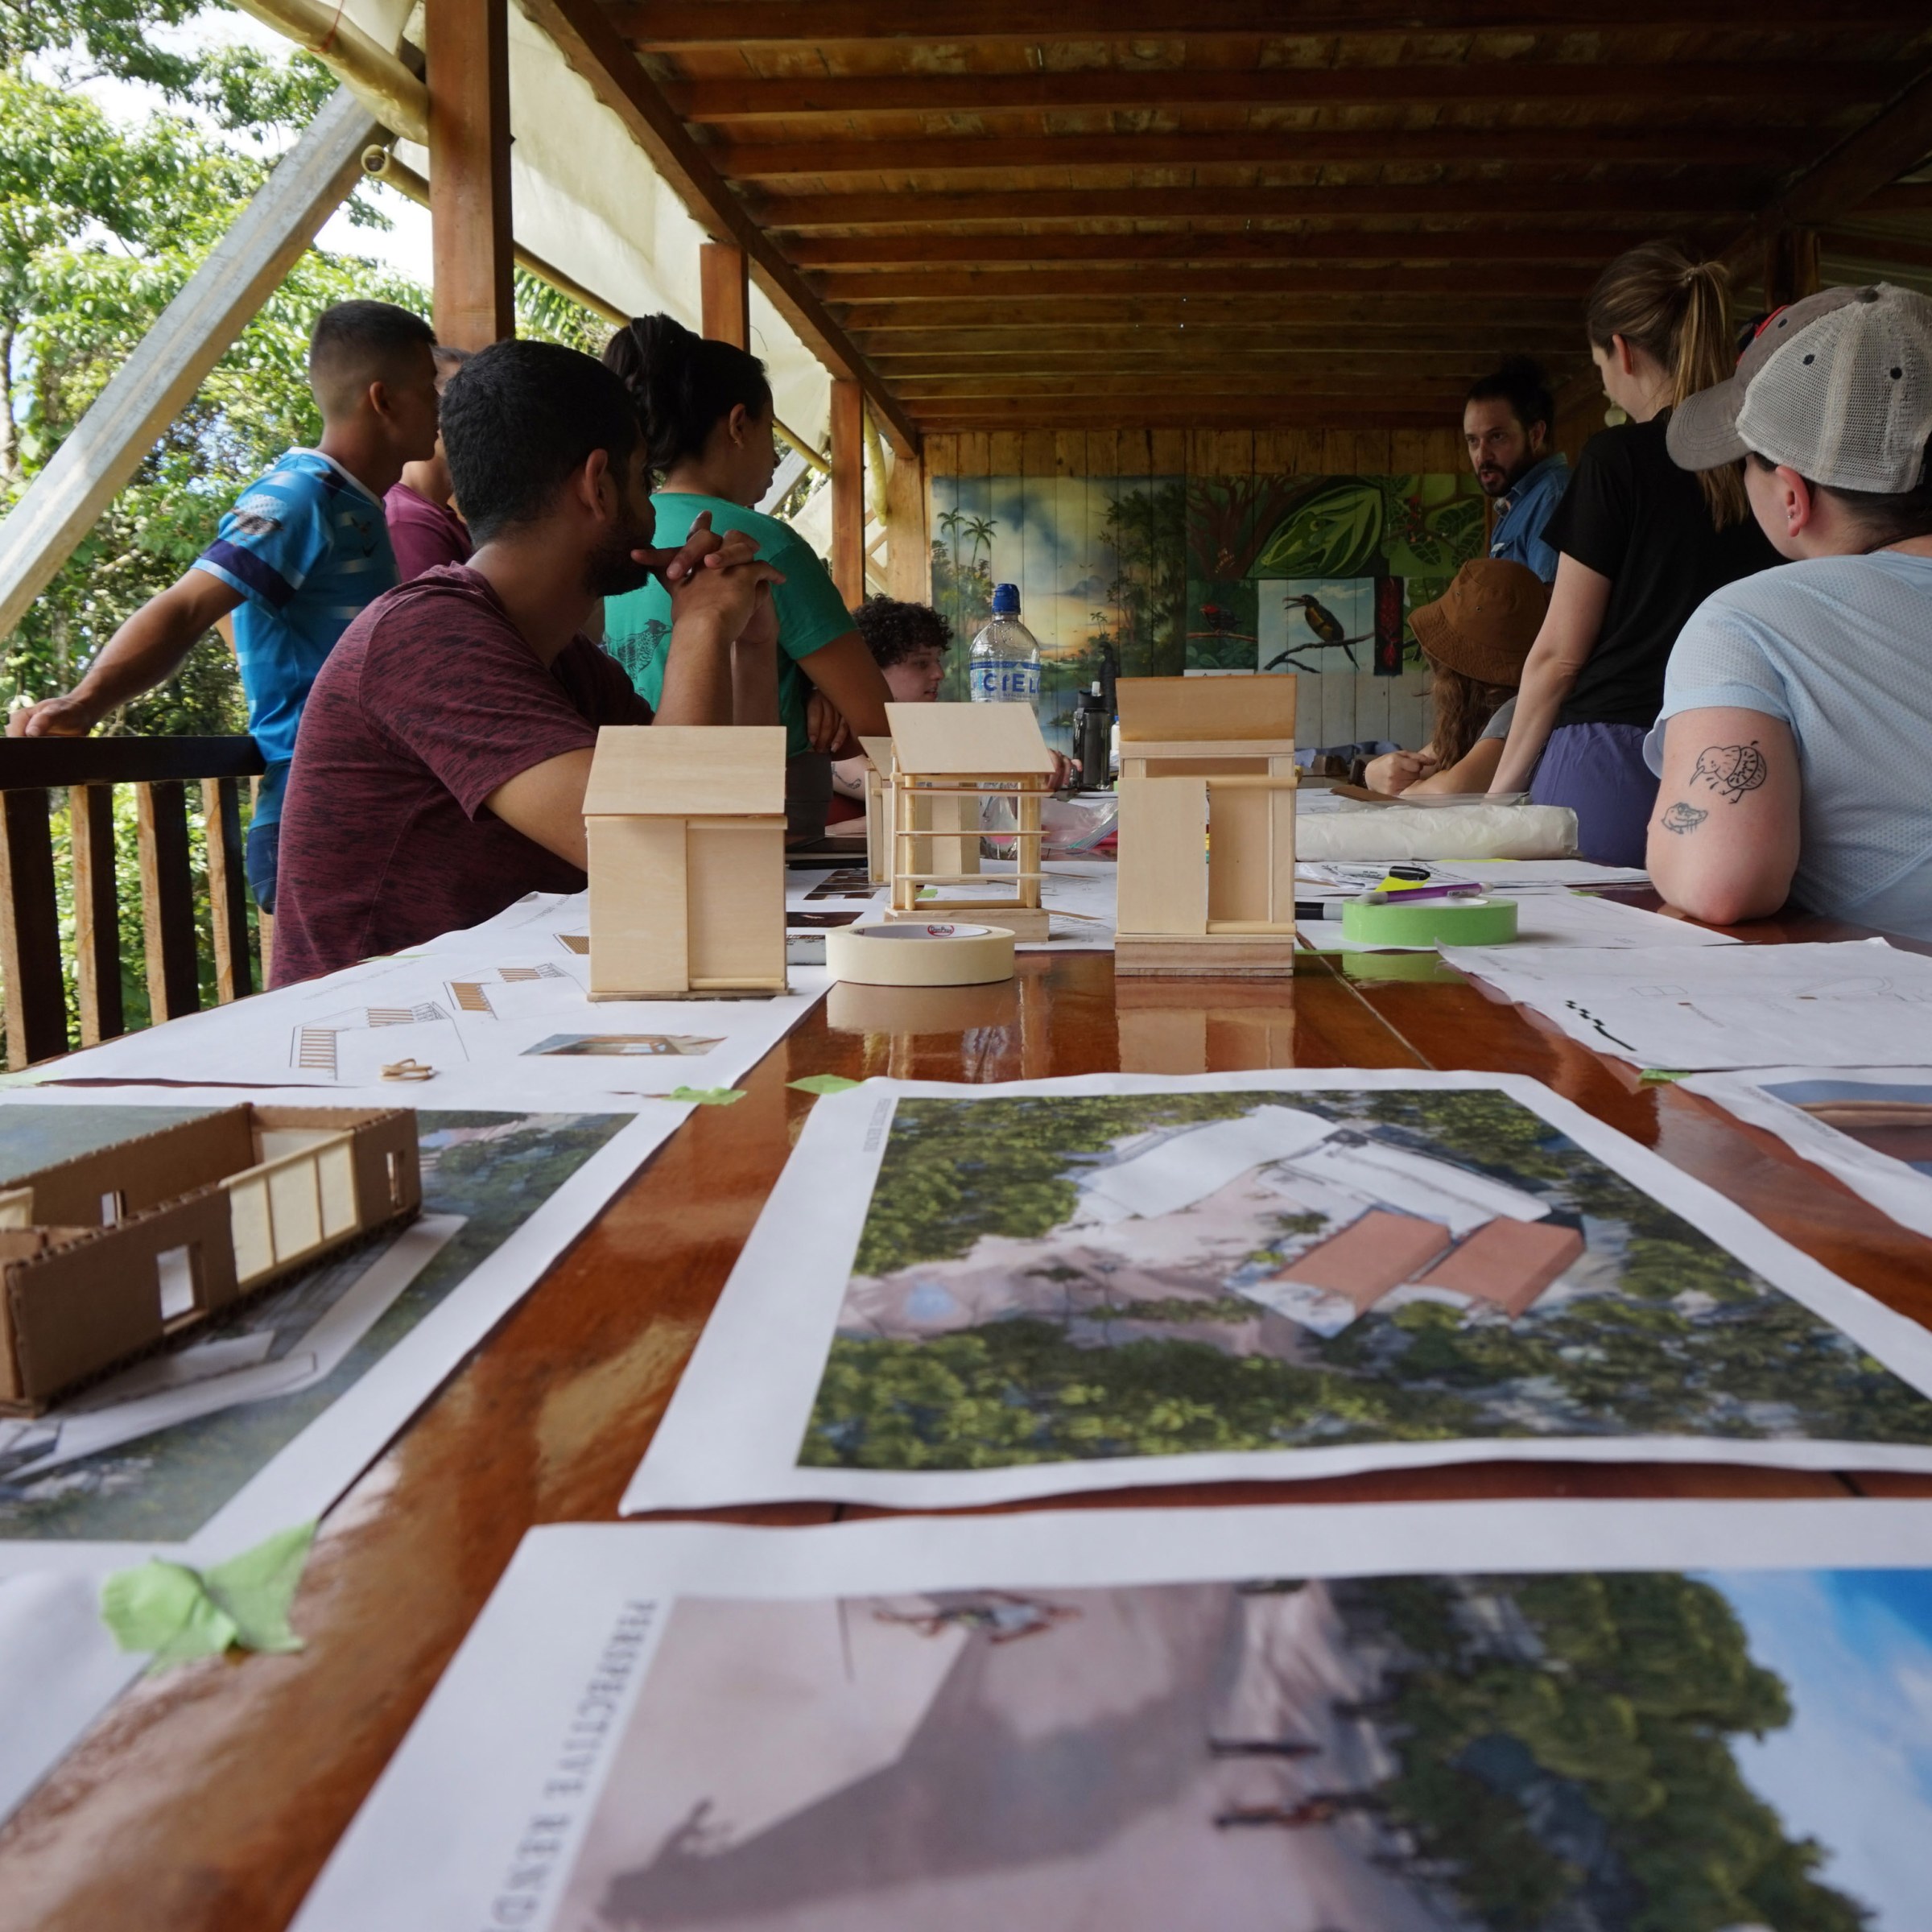 Architectural drawings and wood models cover a table in the foreground with students and people standing and sitting while talking in the background under a pavilion with a tropical forest on either side.